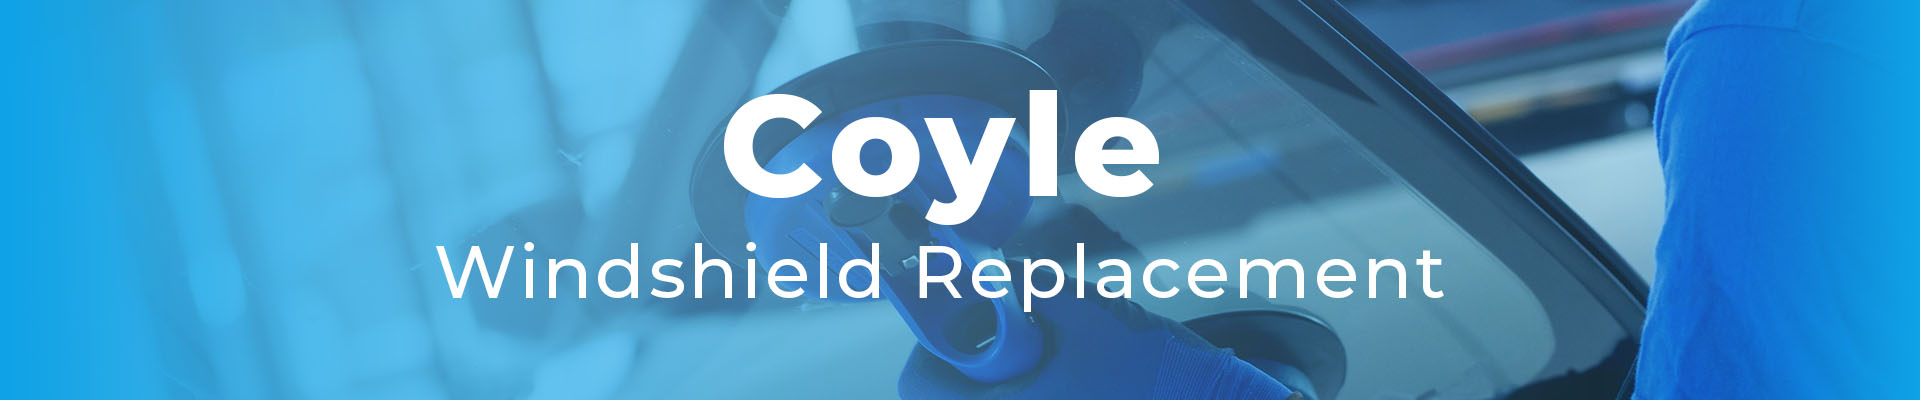 Coyle Windshield Replacement